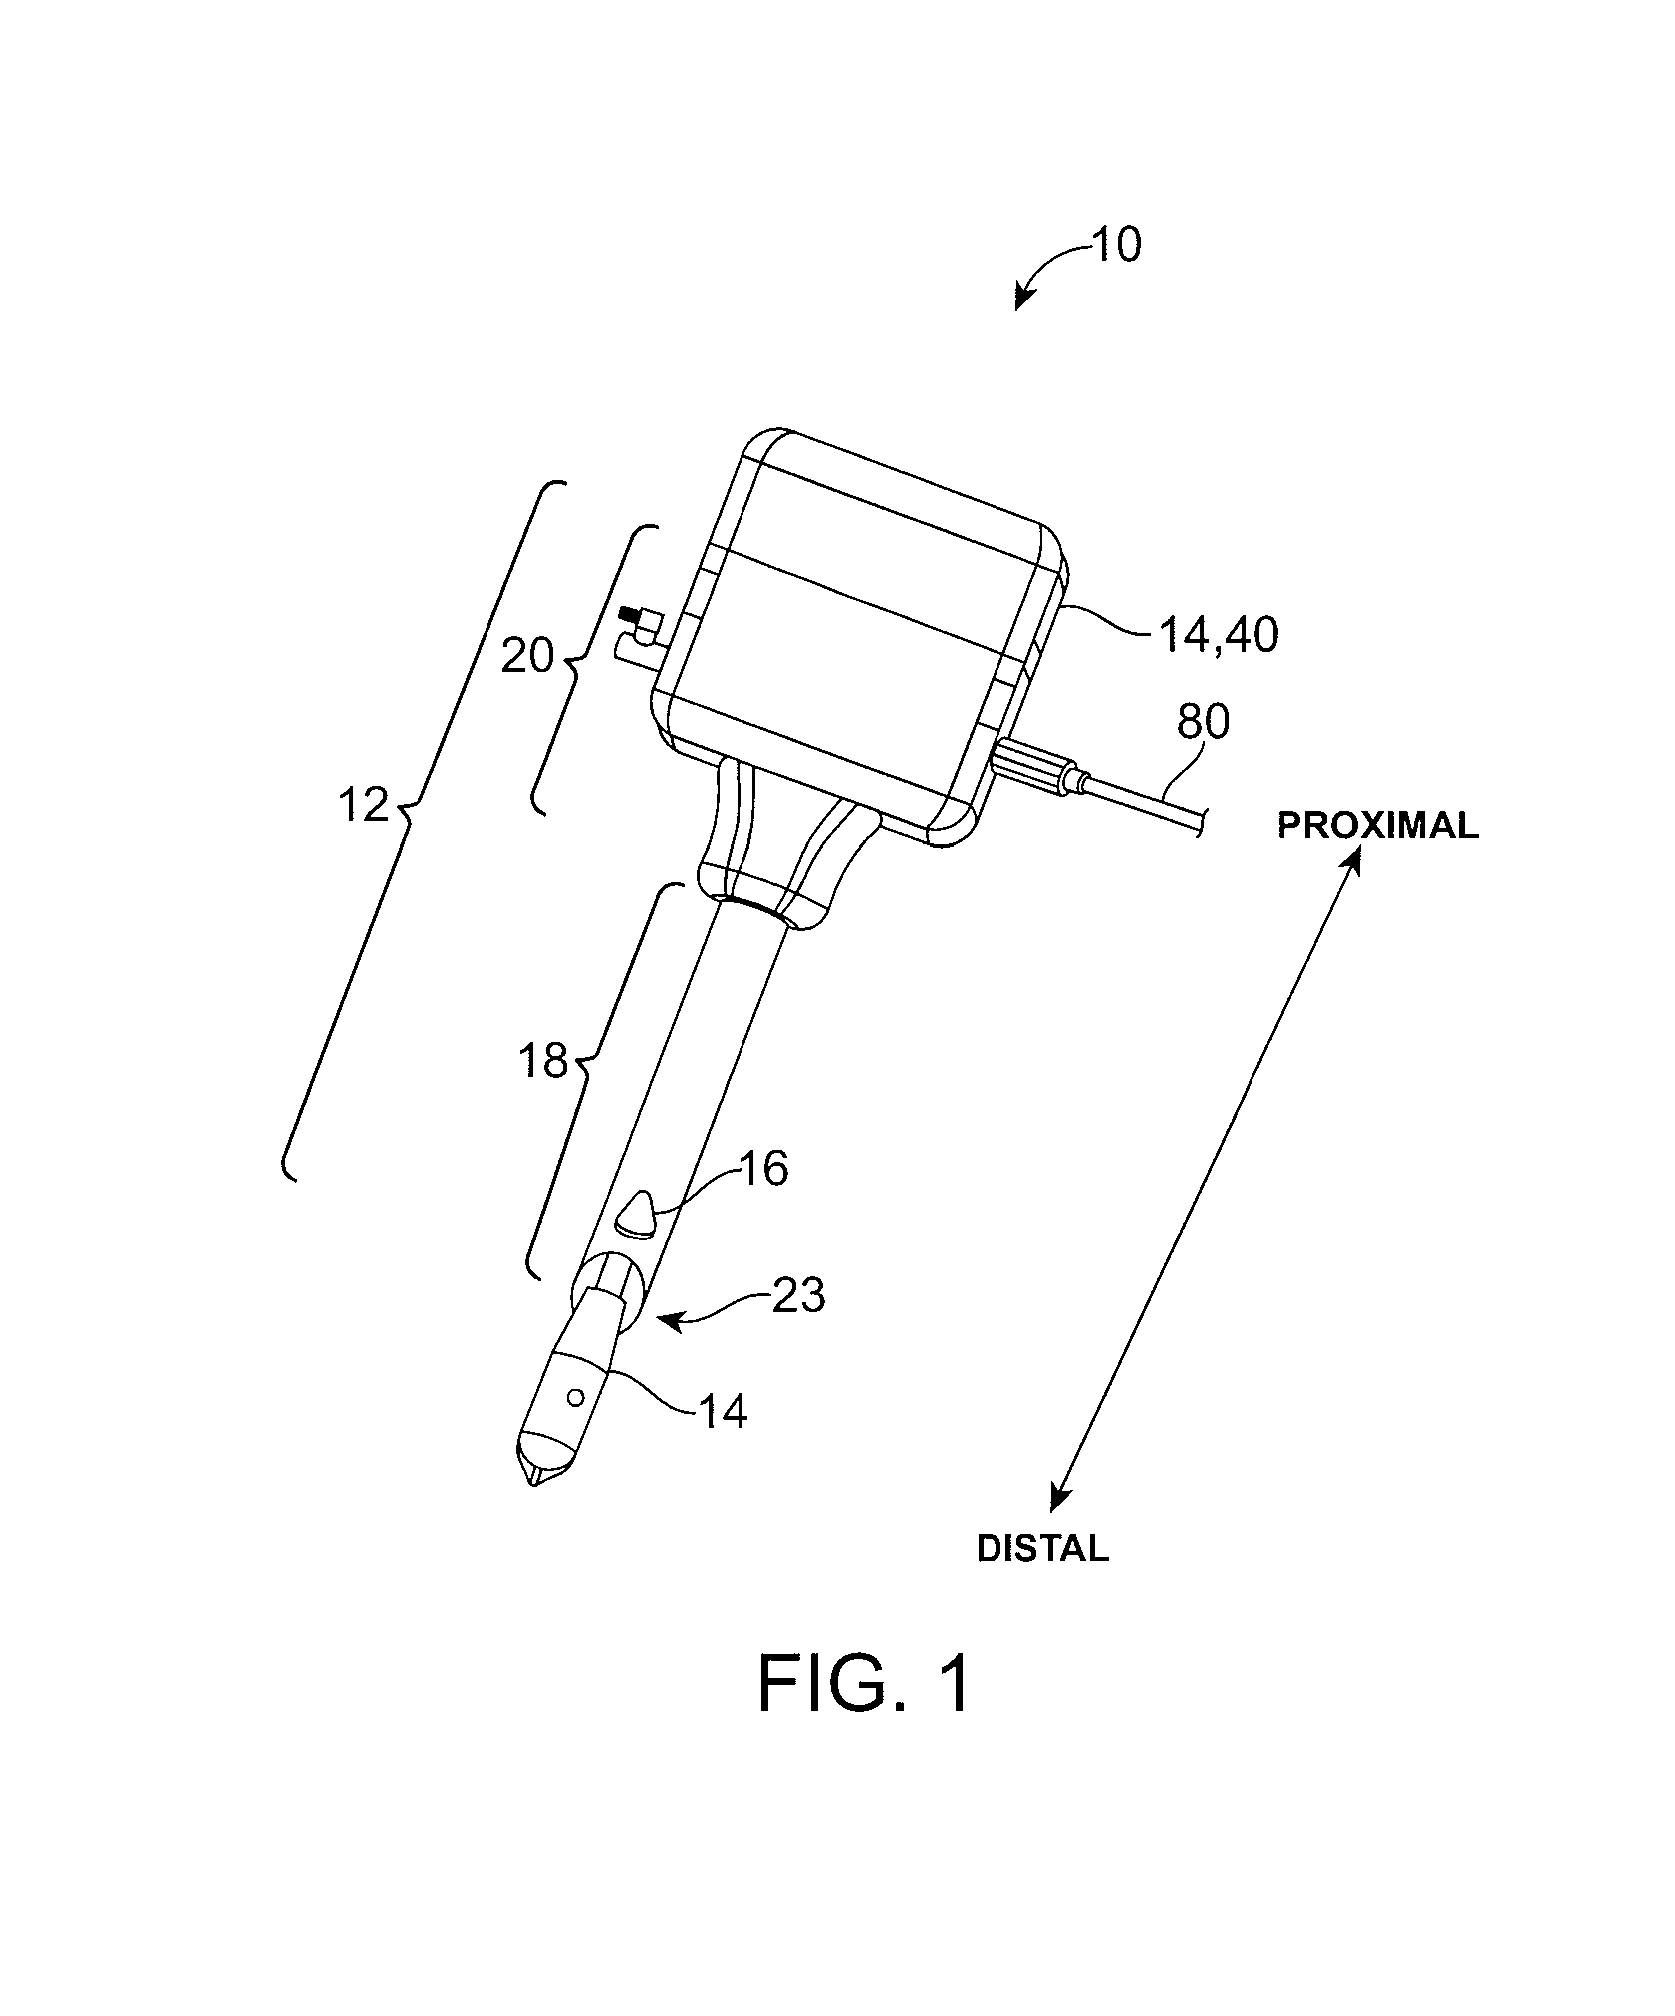 Surgical Port With Embedded Imaging Device